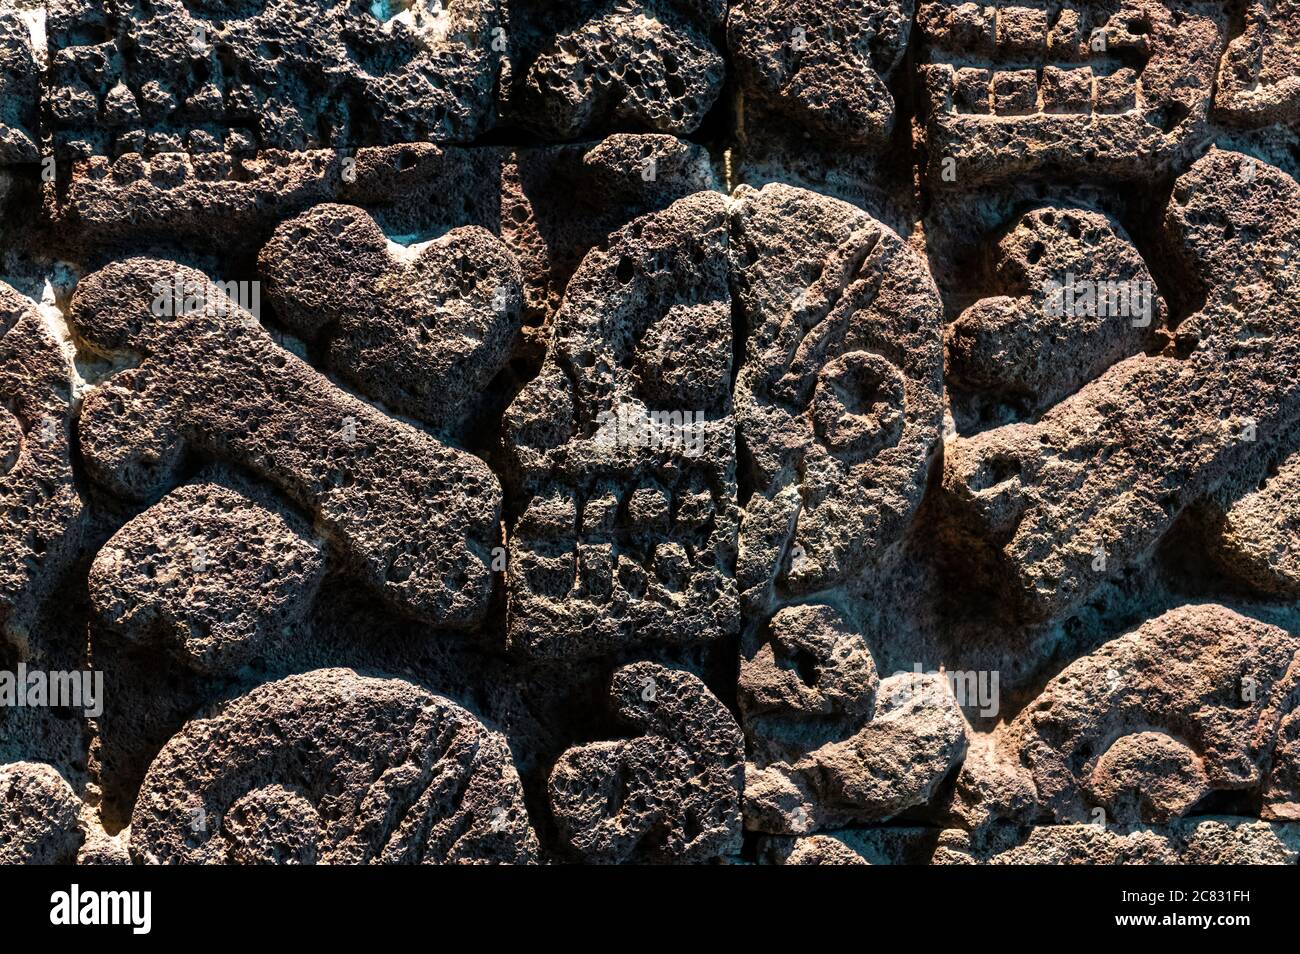 Human skull carving in the Aztec temples and pyramids, Mexico City, Mexico. Stock Photo